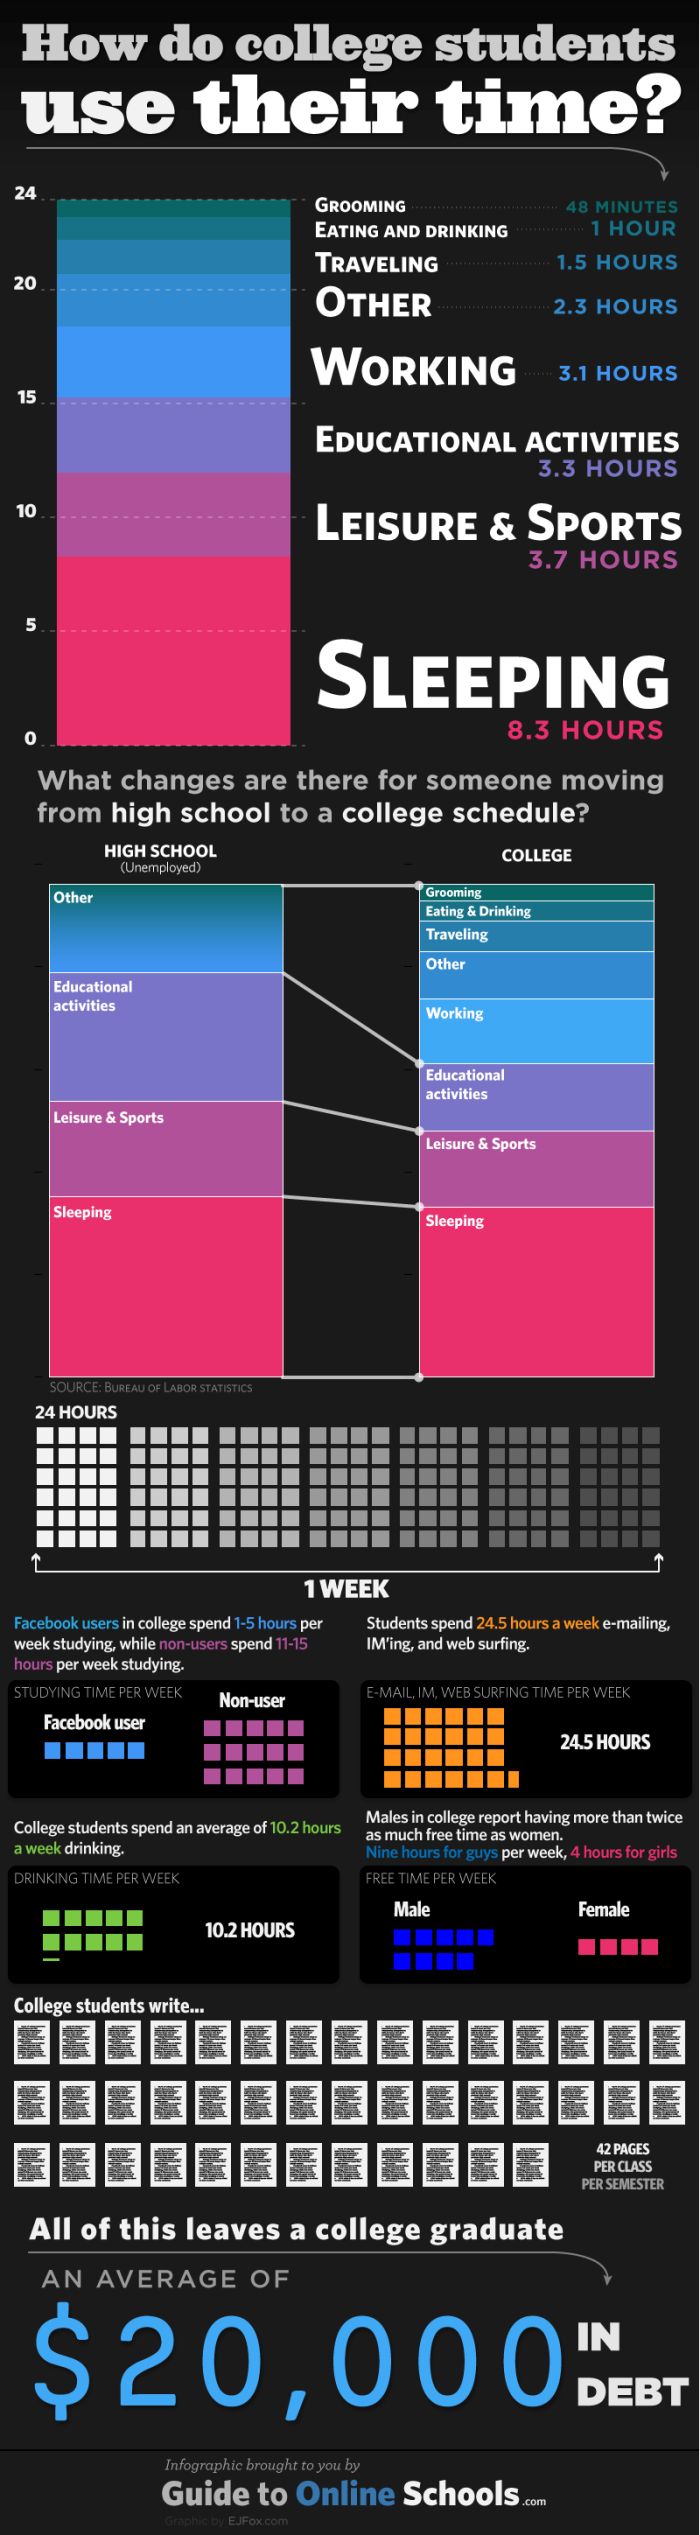 How do College Students Use Their Time (infographic)